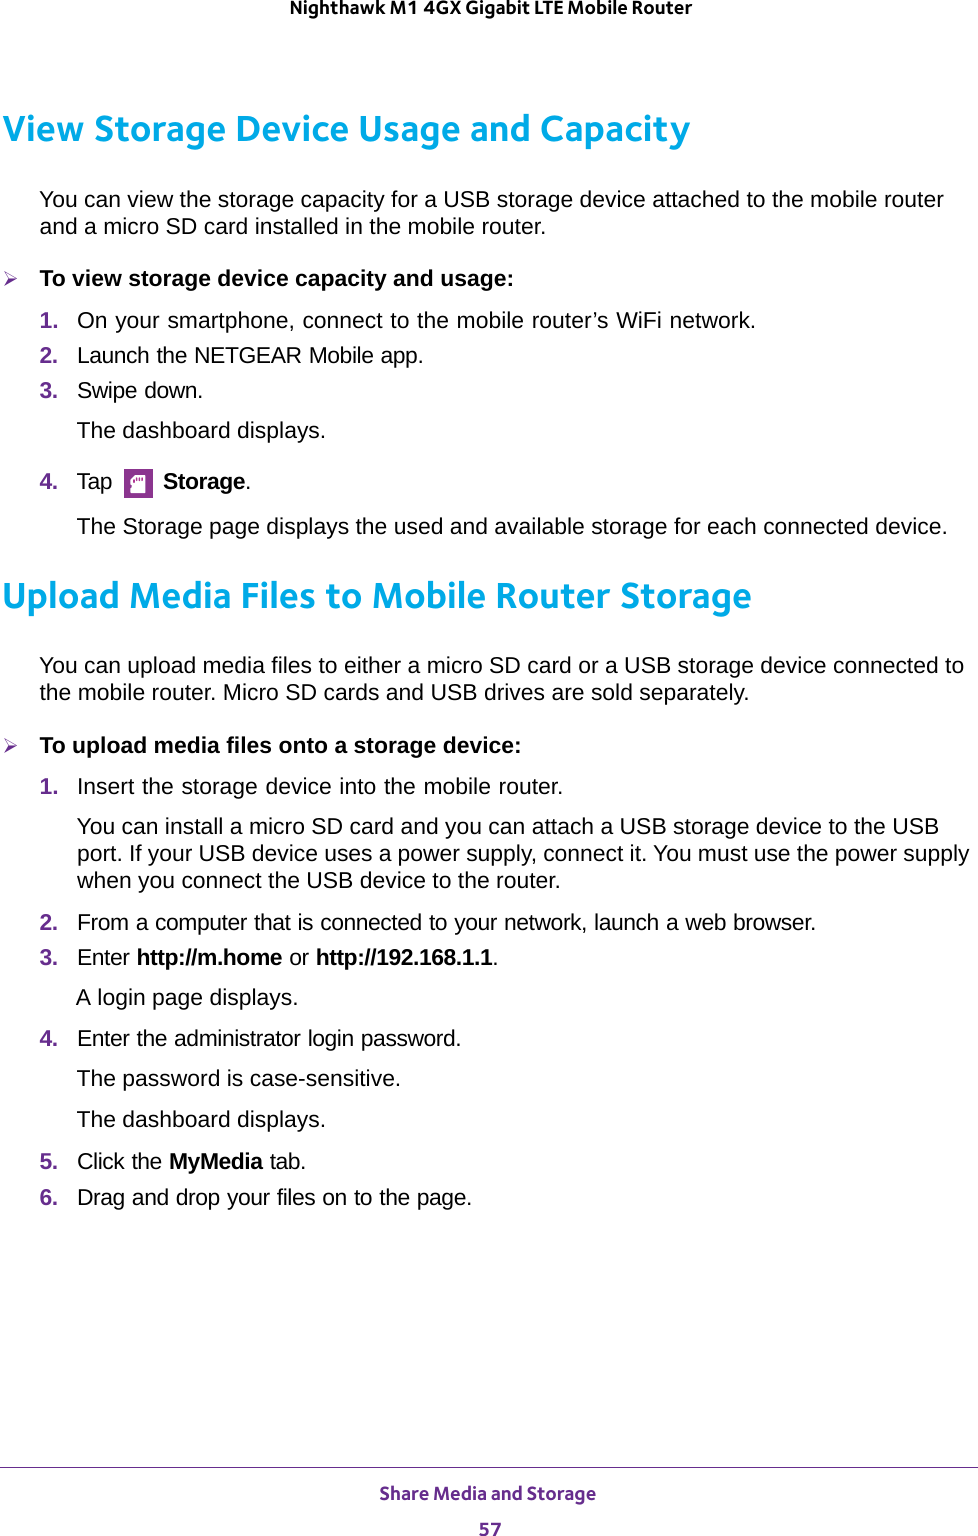 Share Media and Storage 57 Nighthawk M1 4GX Gigabit LTE Mobile RouterView Storage Device Usage and CapacityYou can view the storage capacity for a USB storage device attached to the mobile router and a micro SD card installed in the mobile router.To view storage device capacity and usage:1.  On your smartphone, connect to the mobile router’s WiFi network.2.  Launch the NETGEAR Mobile app.3.  Swipe down.The dashboard displays.4.  Tap   Storage.The Storage page displays the used and available storage for each connected device.Upload Media Files to Mobile Router StorageYou can upload media files to either a micro SD card or a USB storage device connected to the mobile router. Micro SD cards and USB drives are sold separately.To upload media files onto a storage device:1.  Insert the storage device into the mobile router.You can install a micro SD card and you can attach a USB storage device to the USB port. If your USB device uses a power supply, connect it. You must use the power supply when you connect the USB device to the router.2.  From a computer that is connected to your network, launch a web browser.3.  Enter http://m.home or http://192.168.1.1.A login page displays.4.  Enter the administrator login password.The password is case-sensitive.The dashboard displays.5.  Click the MyMedia tab.6.  Drag and drop your files on to the page.